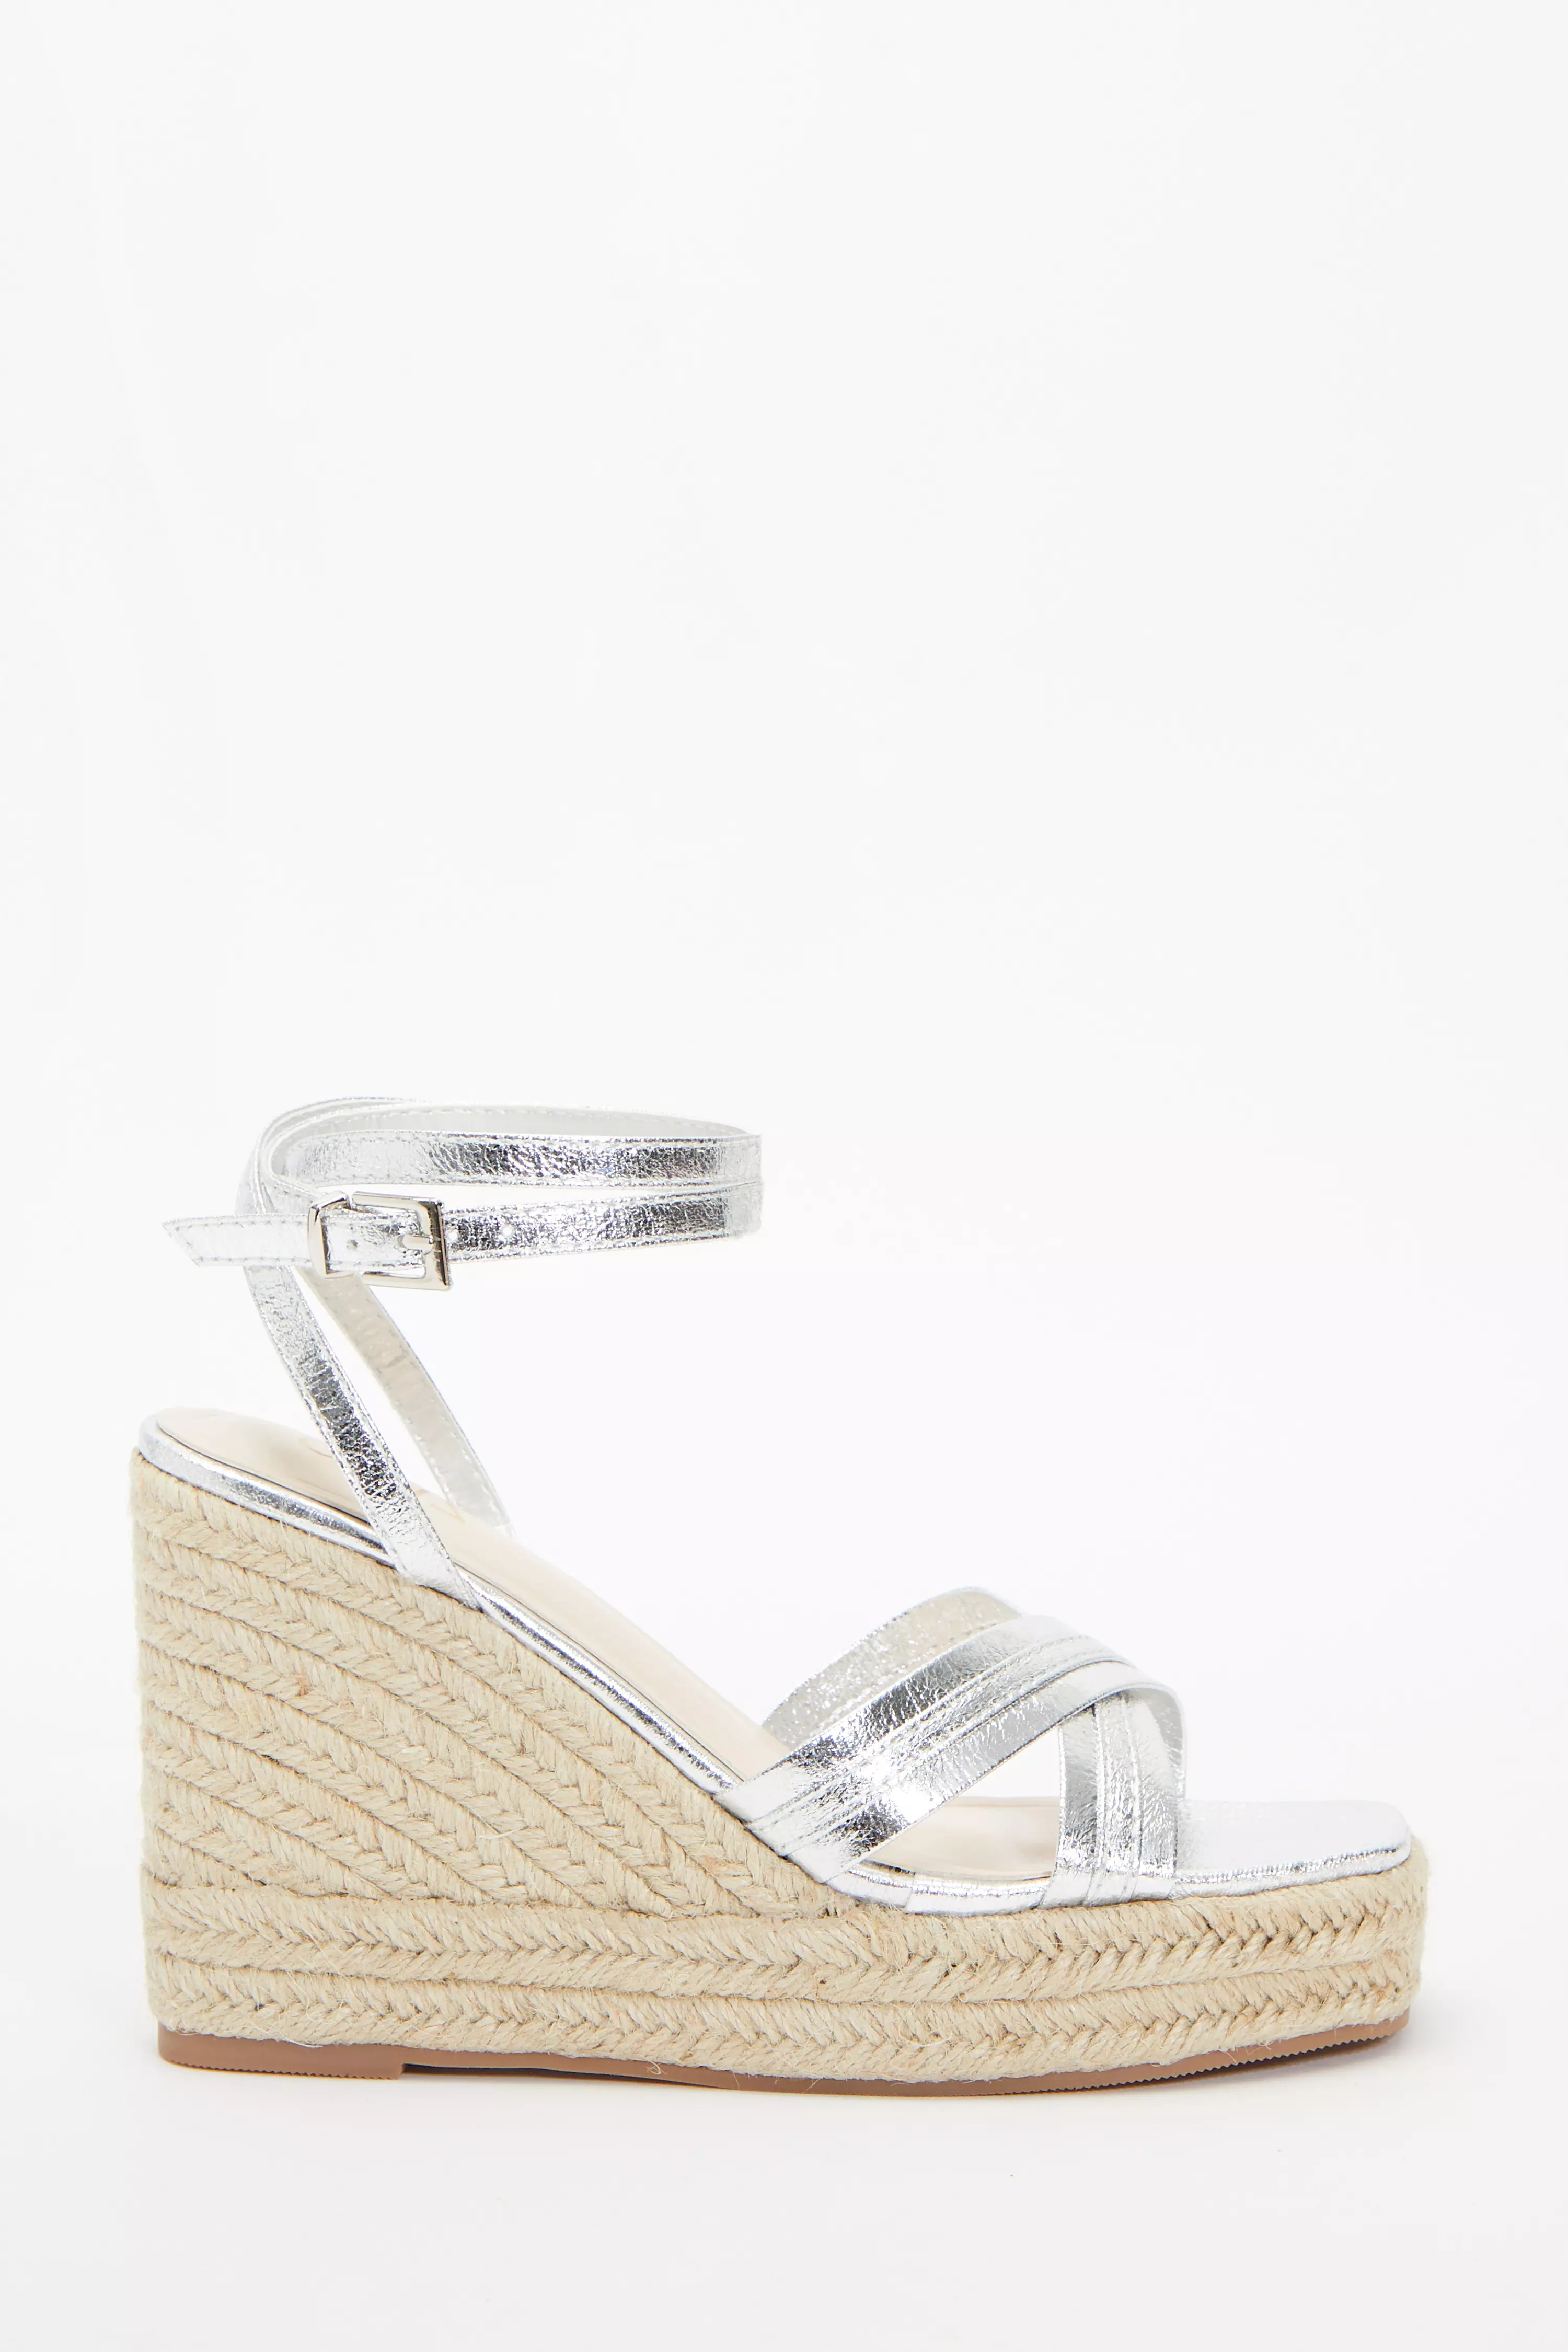 Silver Cross Strap Wedges